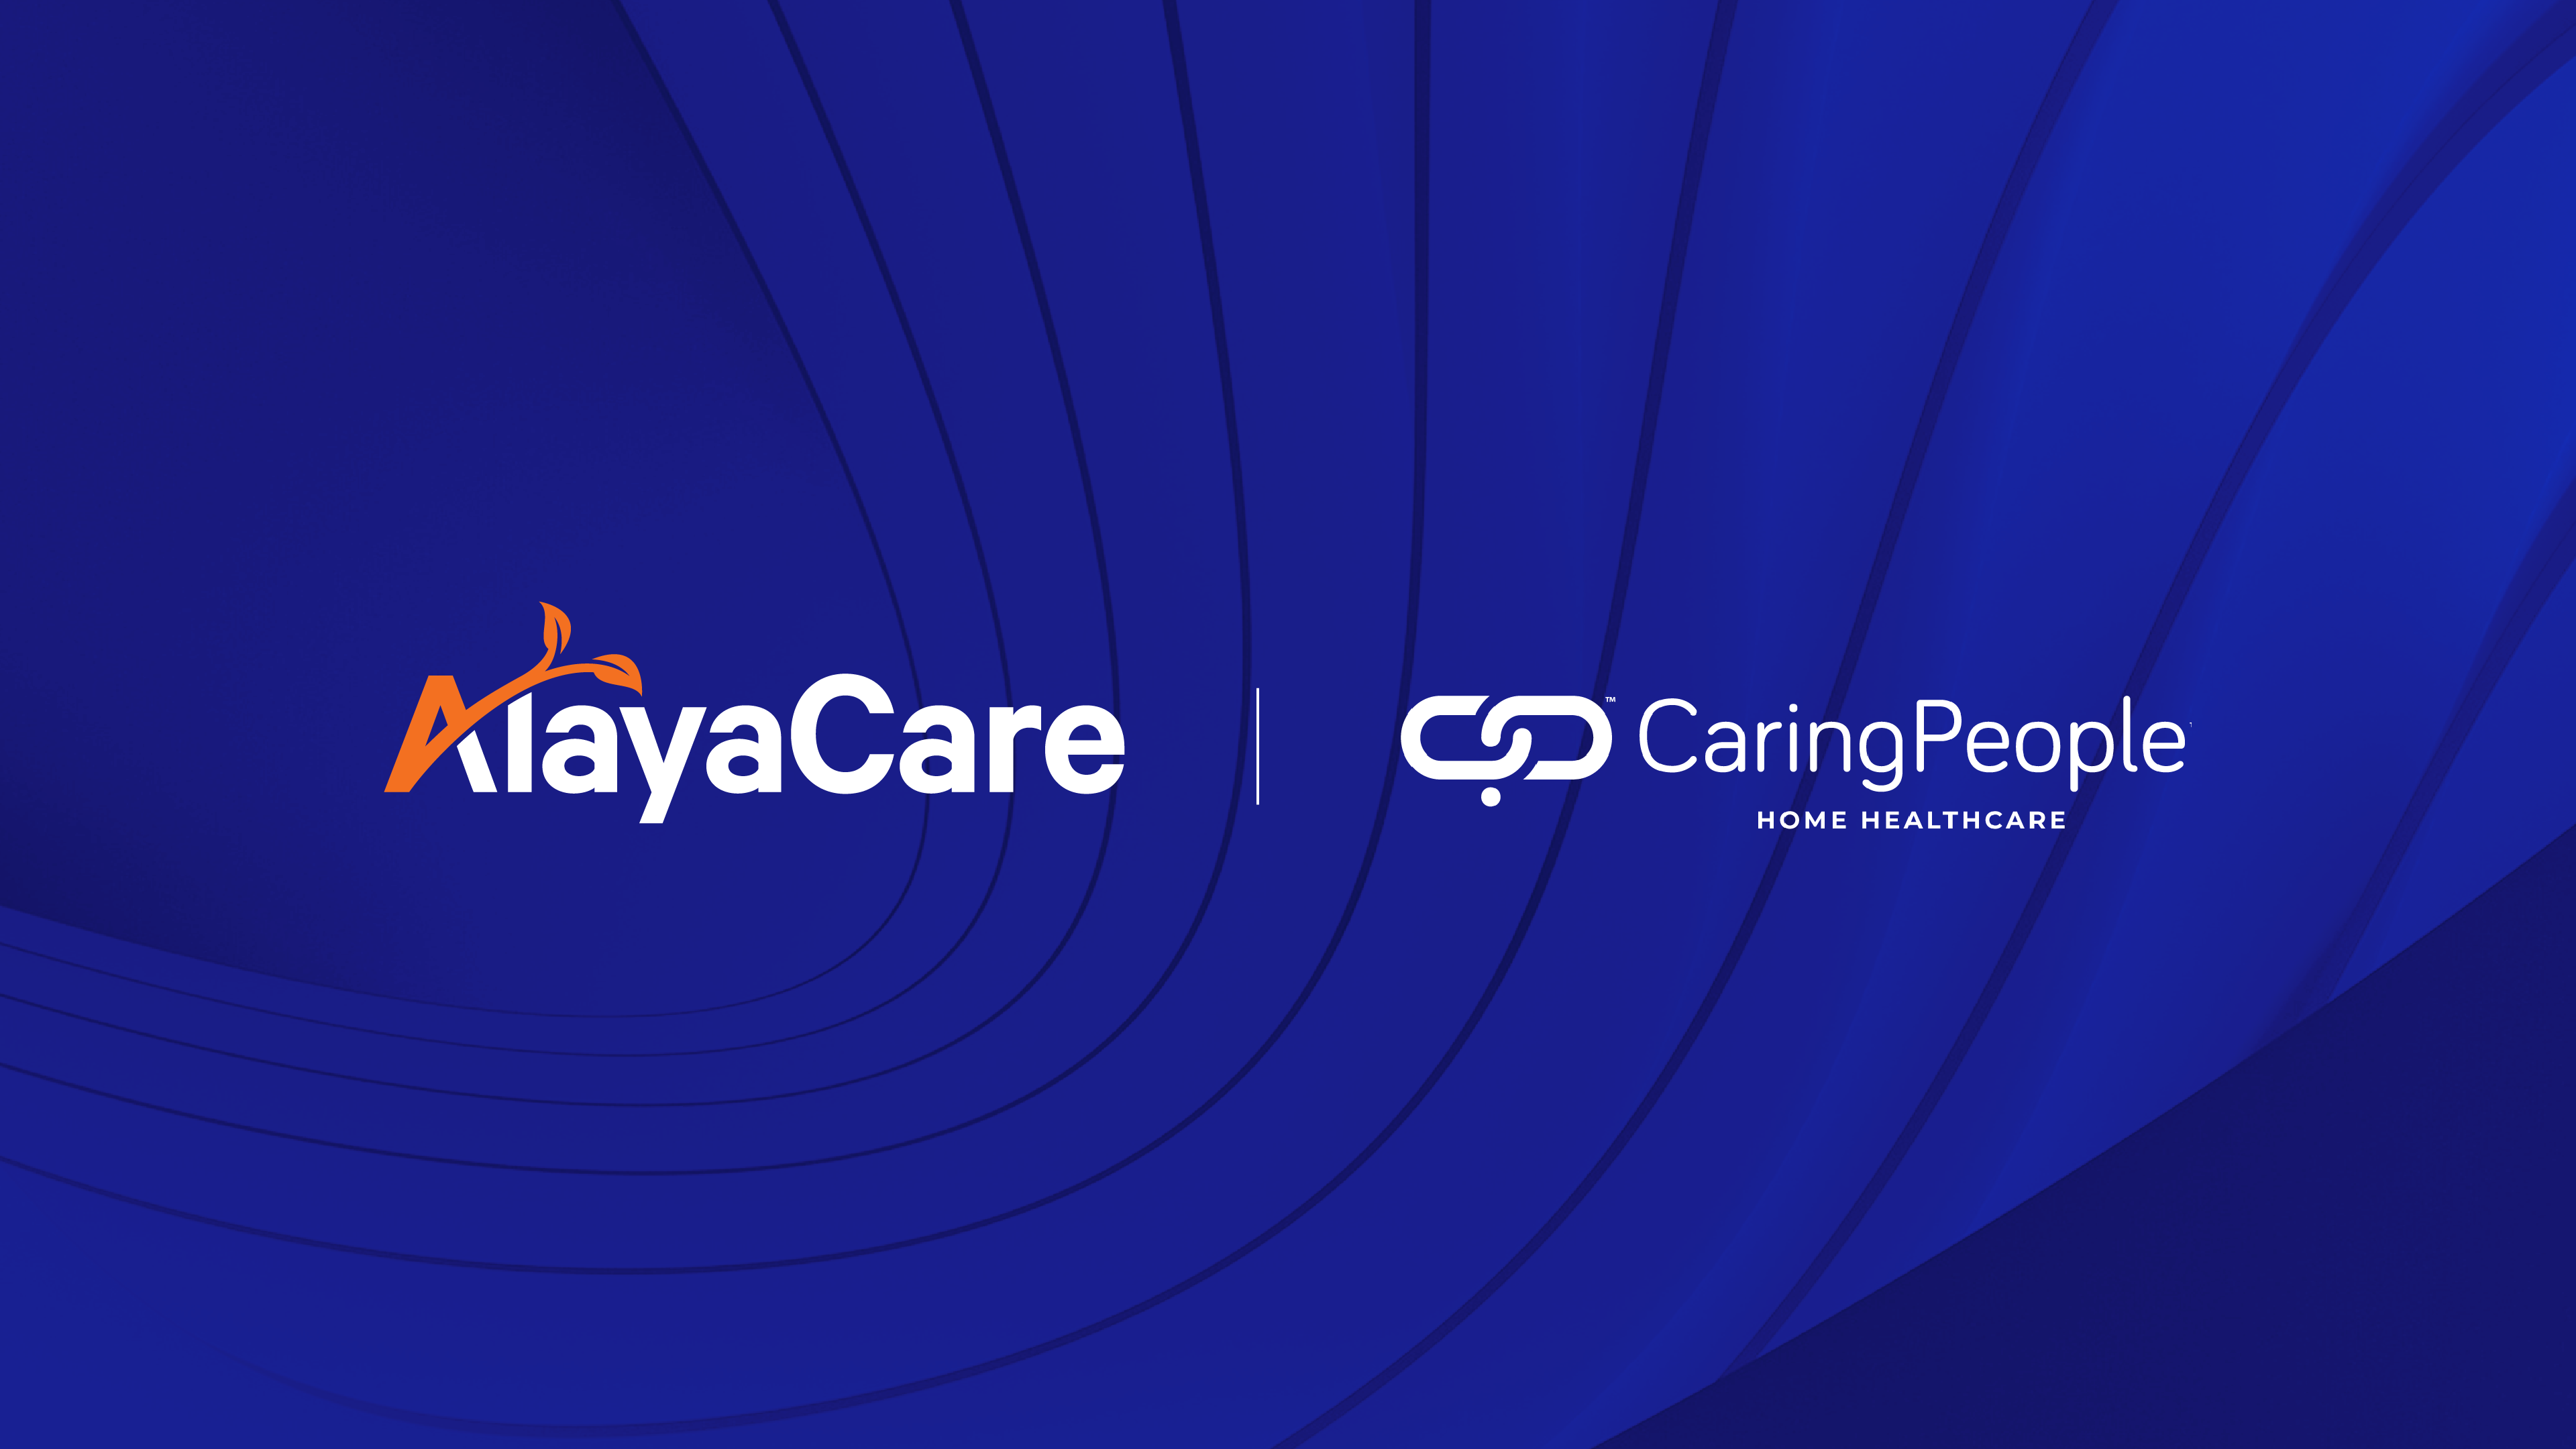 AlayaCare and Caring People logos on dark blue background